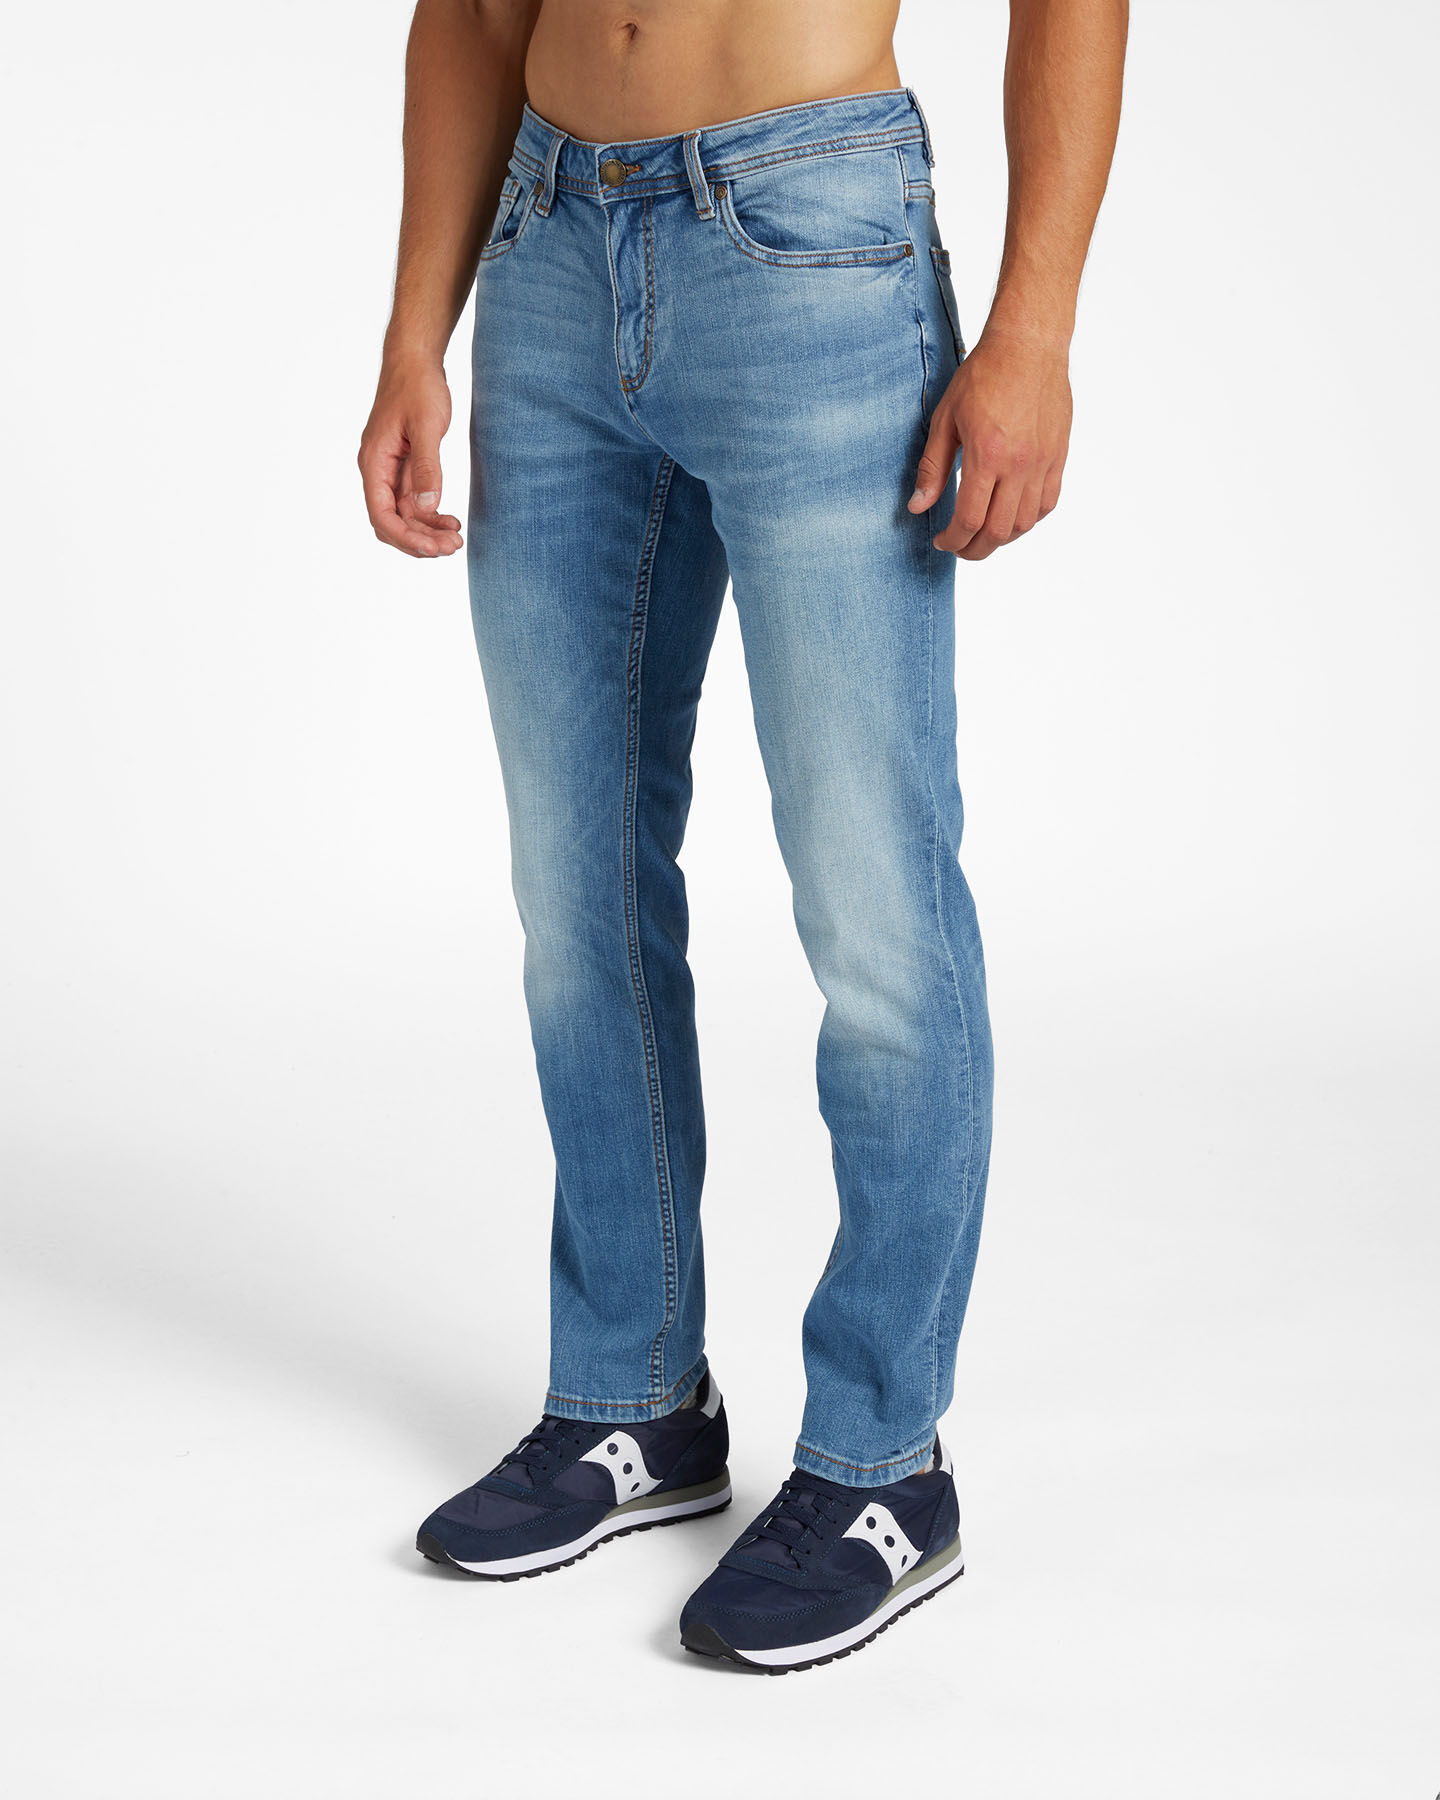  Jeans DACK'S CASUAL CITY M S4106779|MD|46 scatto 2